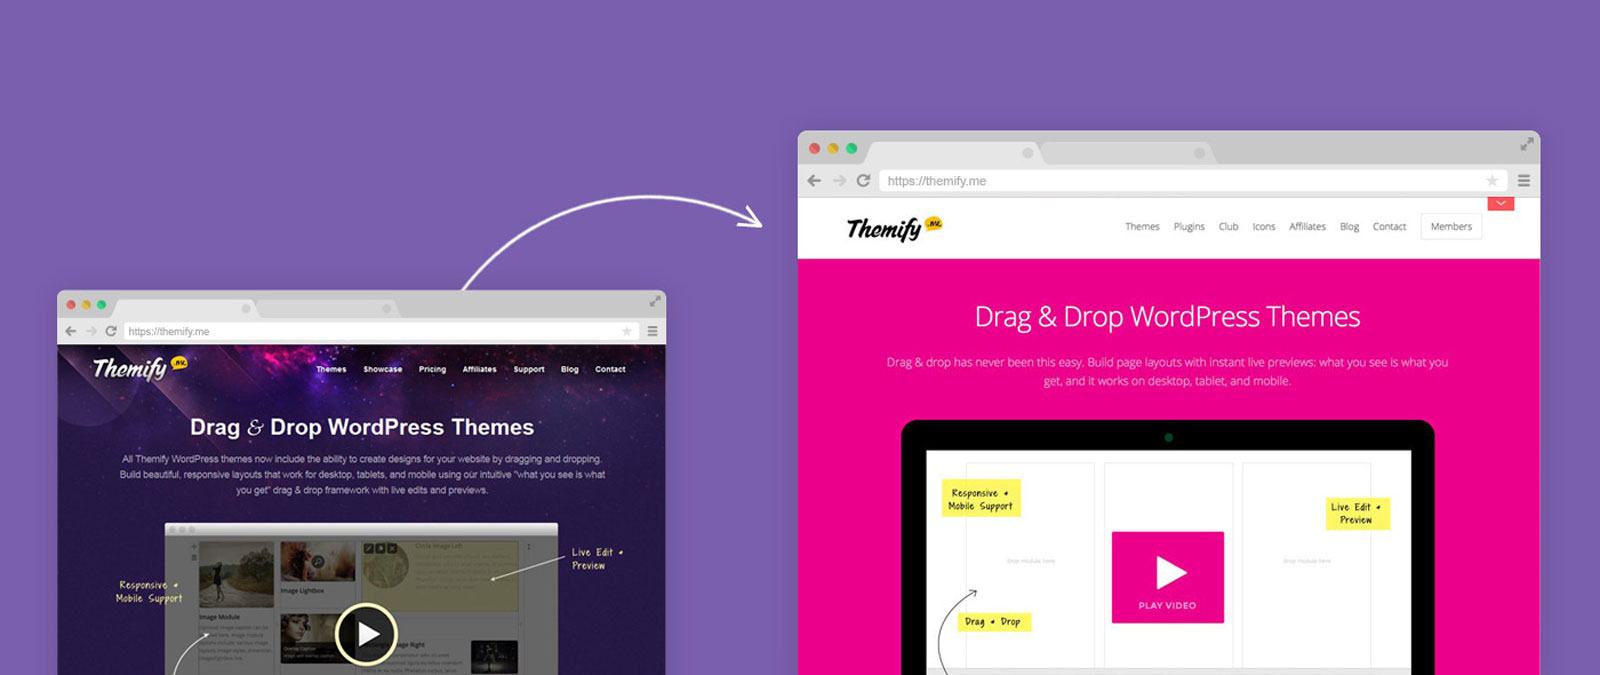 themify redesign